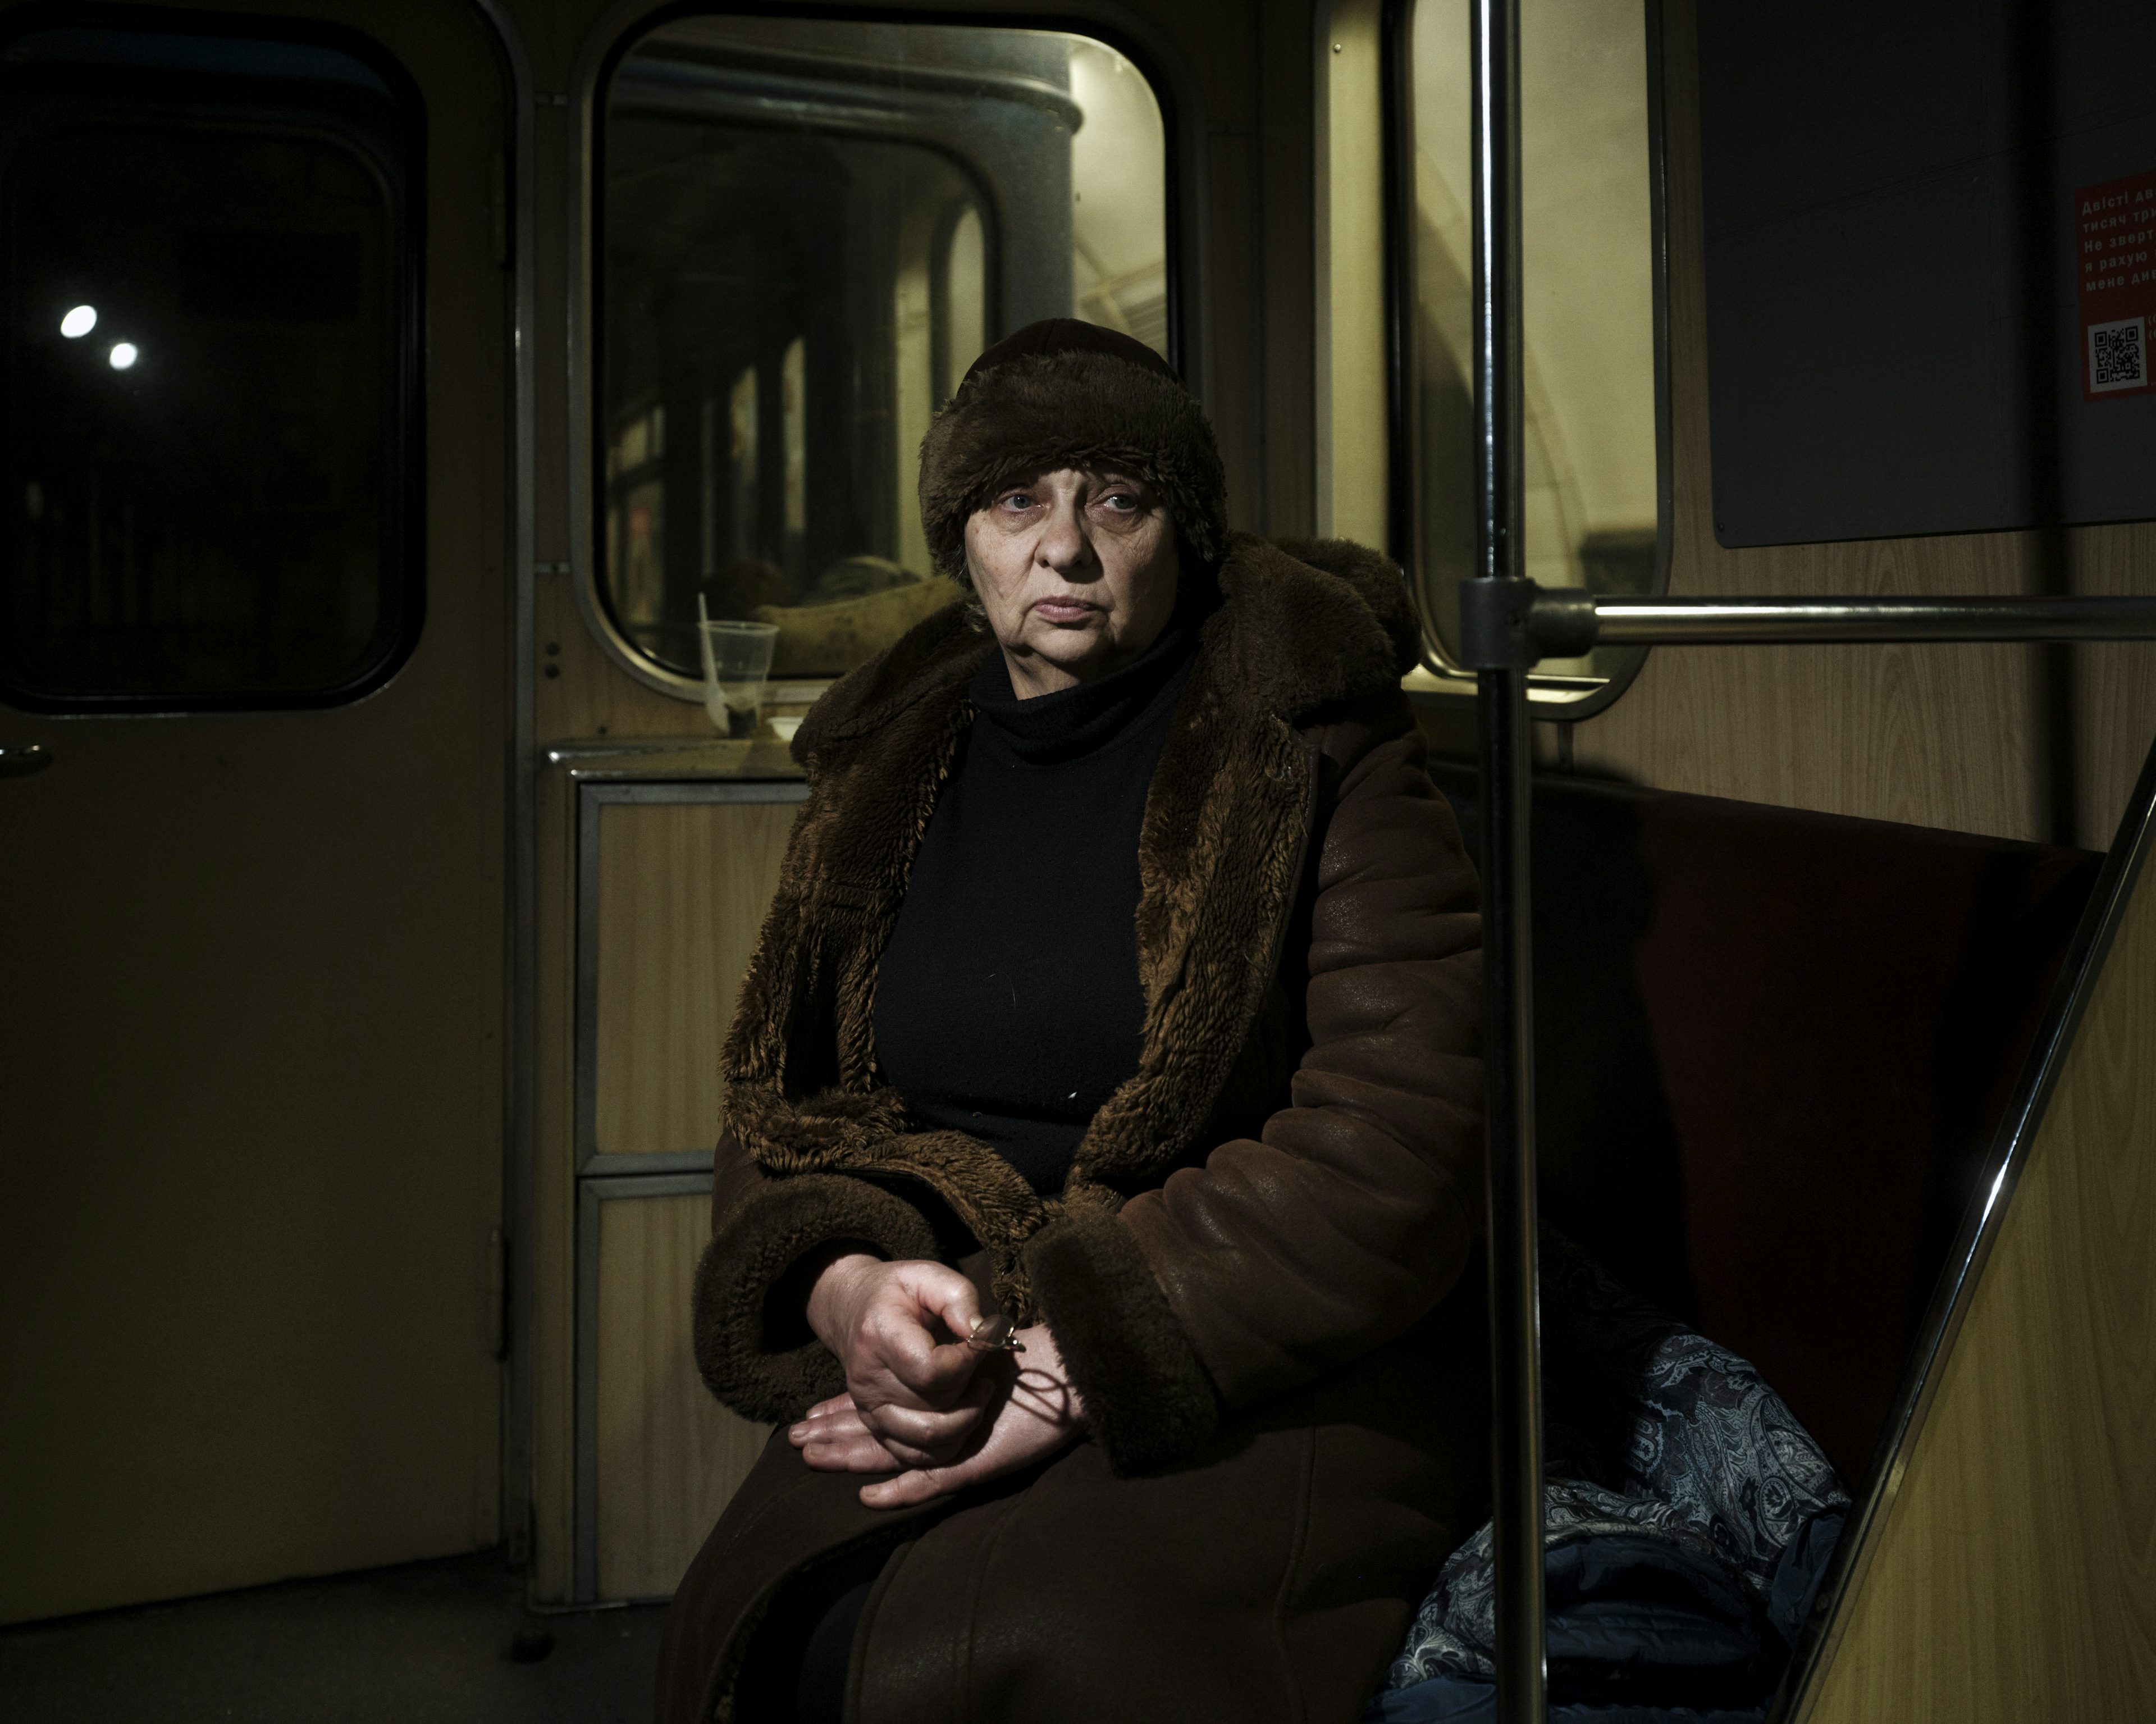 UKRAINE. Kyiv. 4 March 2022. A lady poses for a portrait inside a metro car parked in a tunnel, where she and her family sleep to shelter from the Russian army's mortar fire on the city. Photo by Lorenzo Meloni